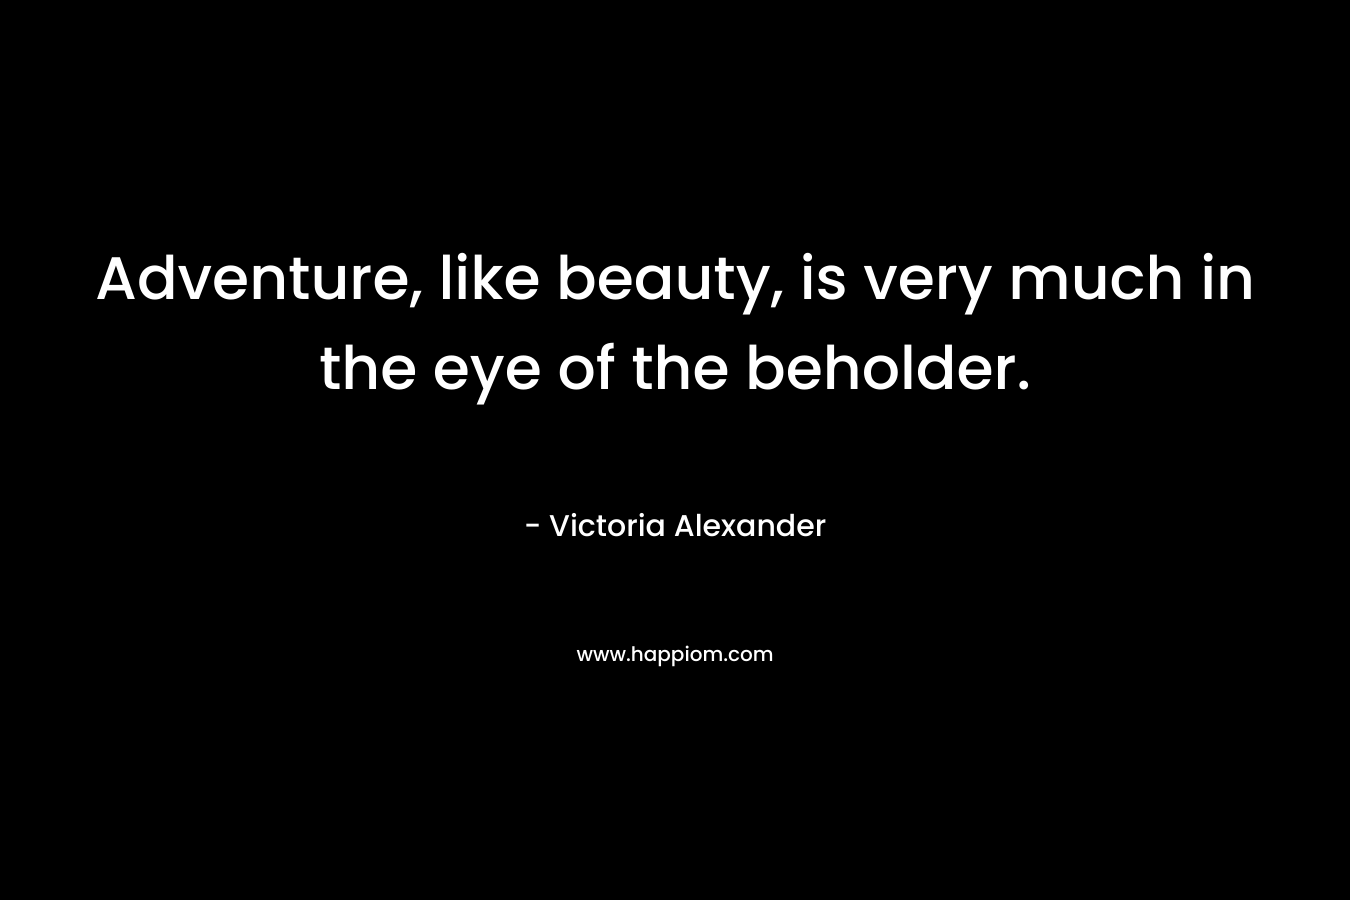 Adventure, like beauty, is very much in the eye of the beholder. – Victoria Alexander